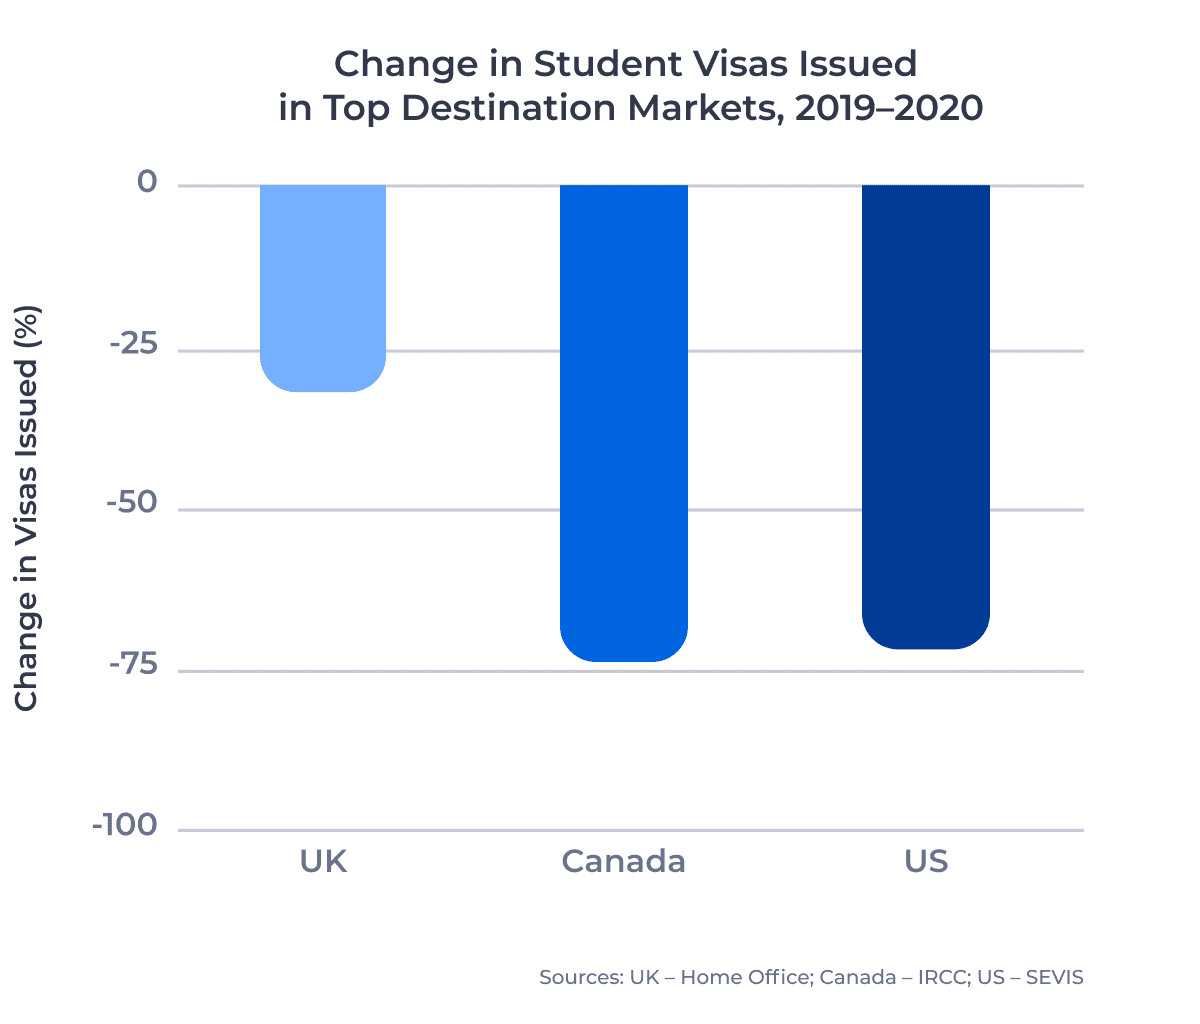 Bar chart showing the percentage change in the number of student visas issued in the US, the UK, and Canada between 2019 and 2020.